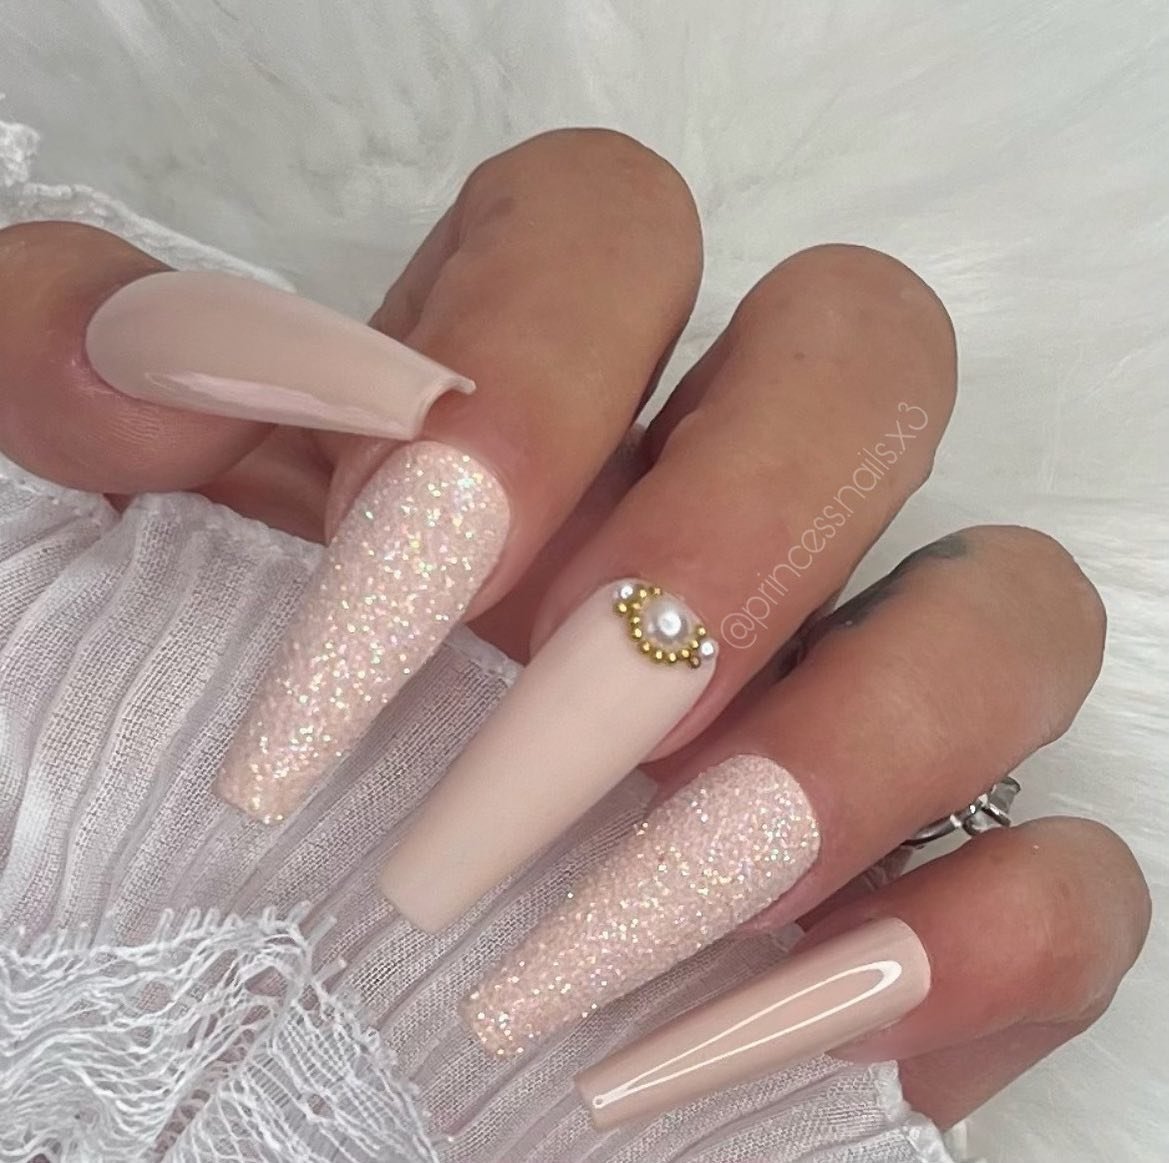 6 - Picture of Nude Baddie Nails